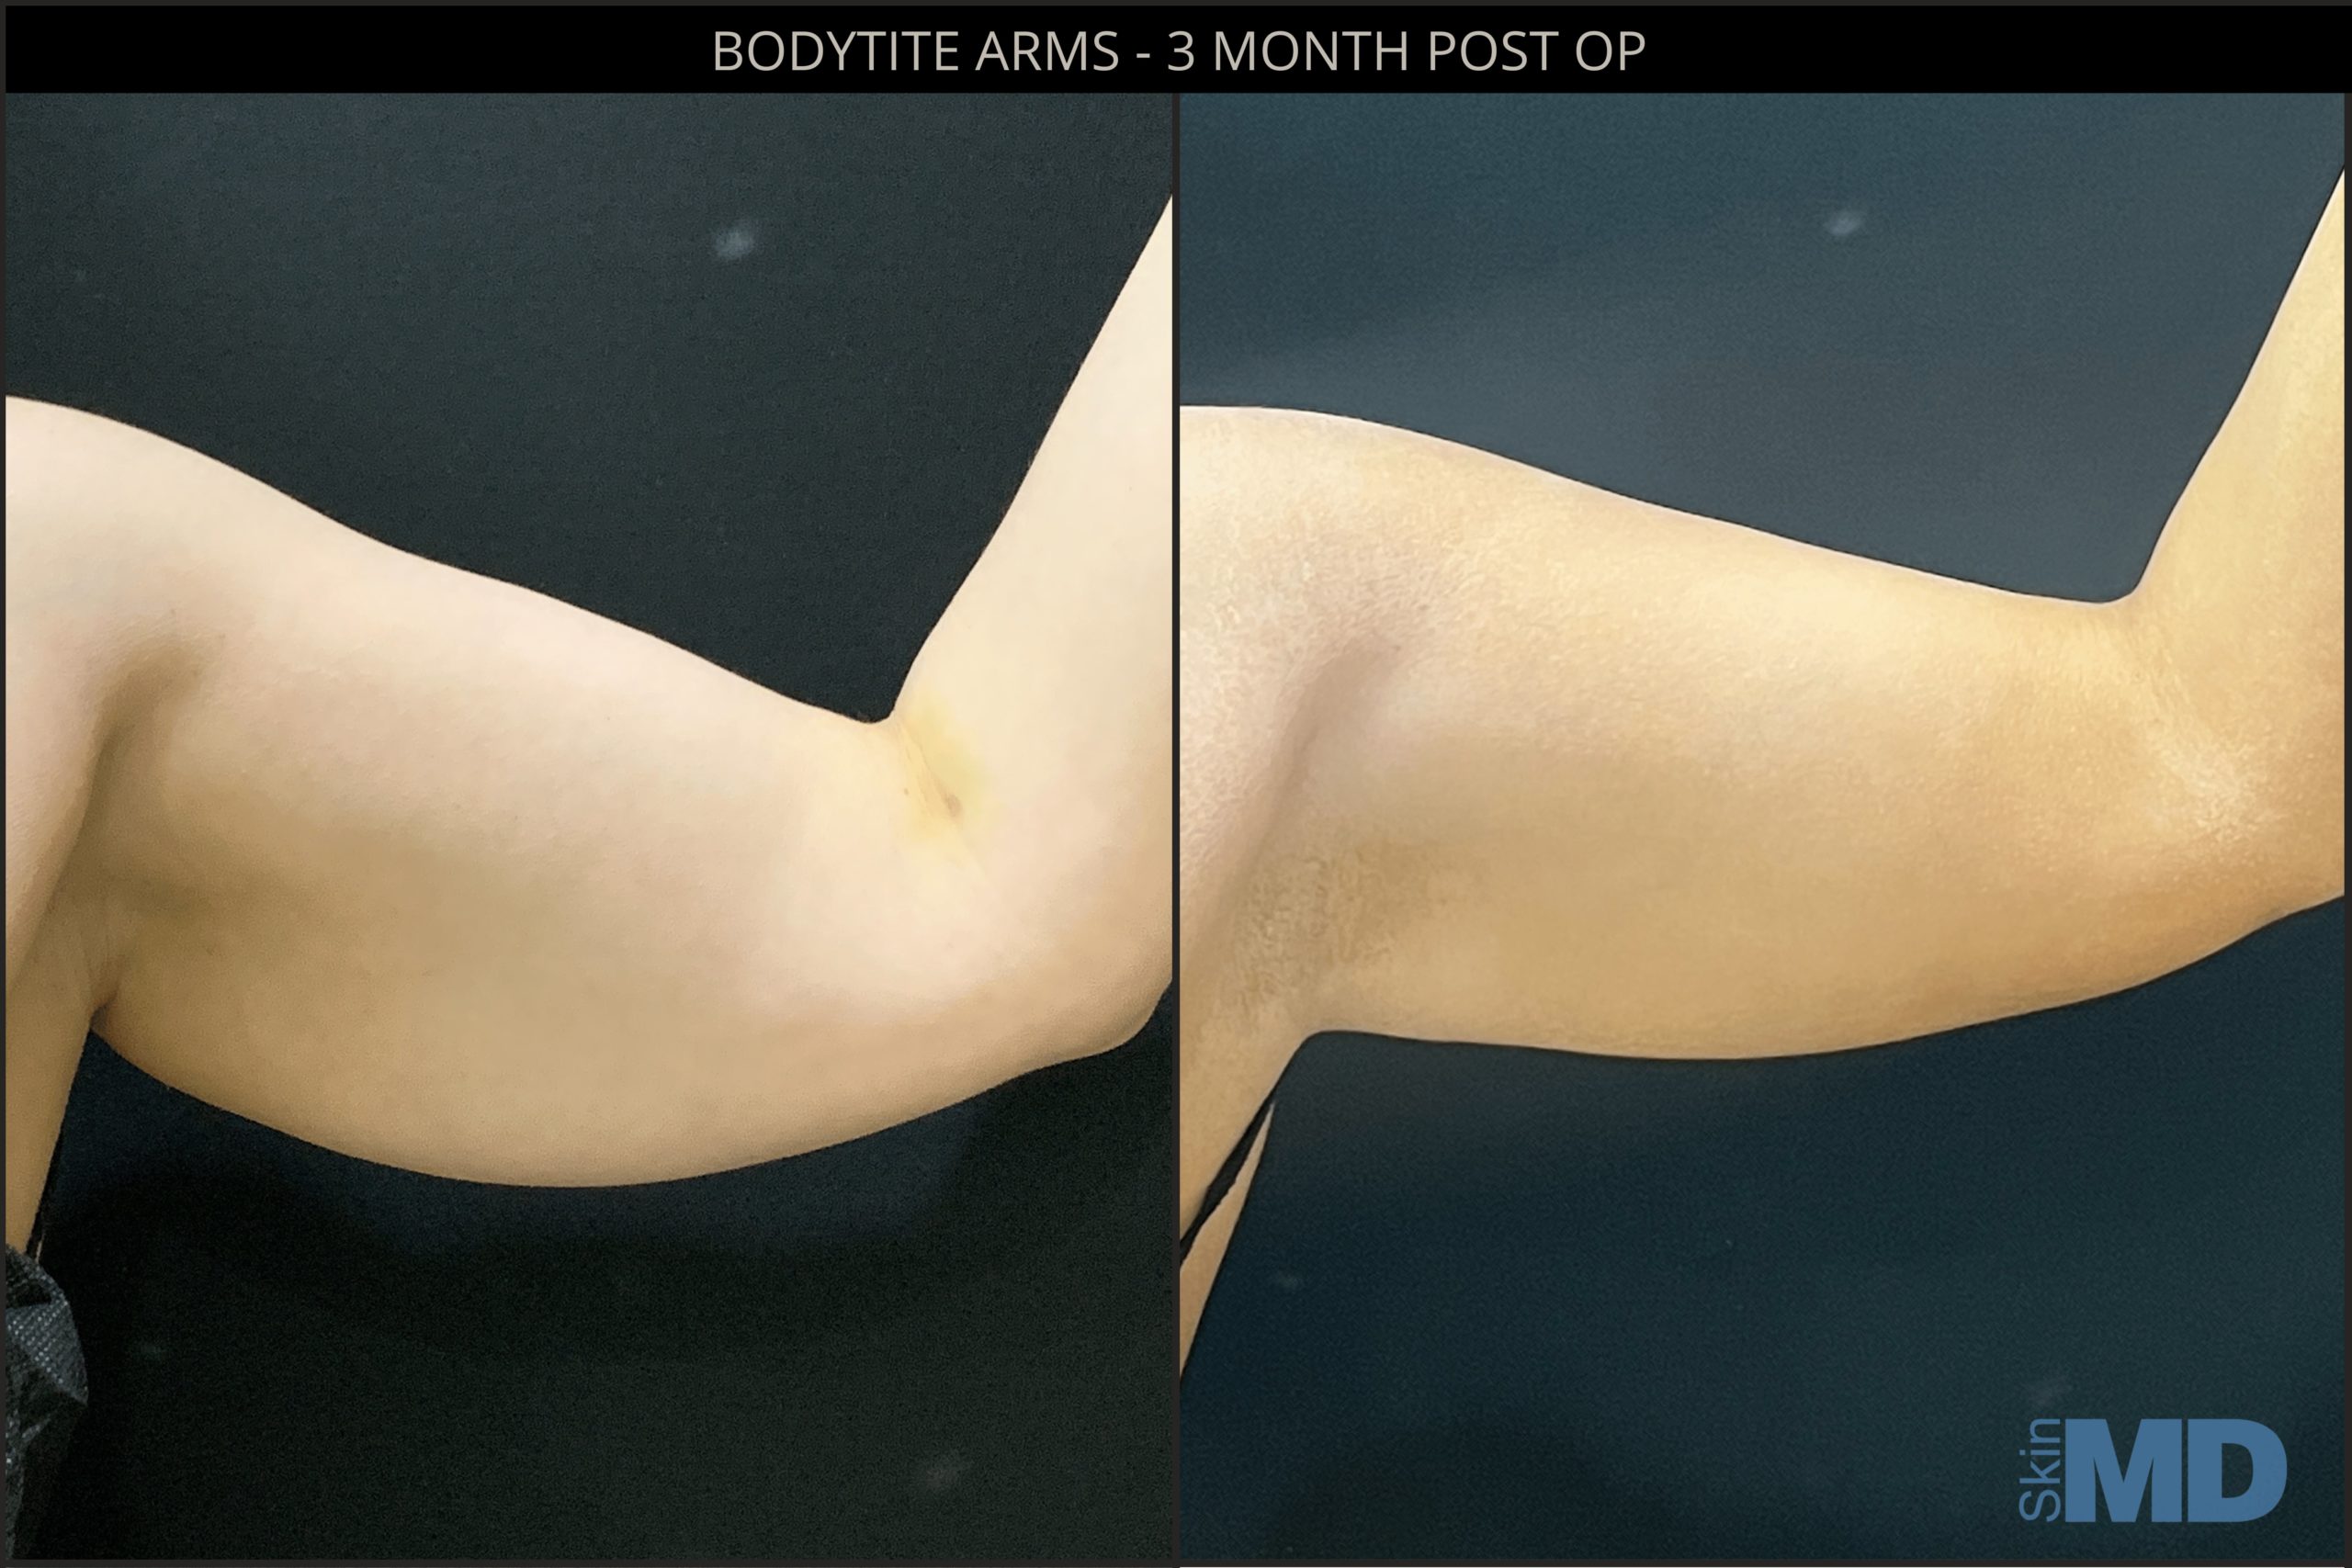 Before and after BodyTite results